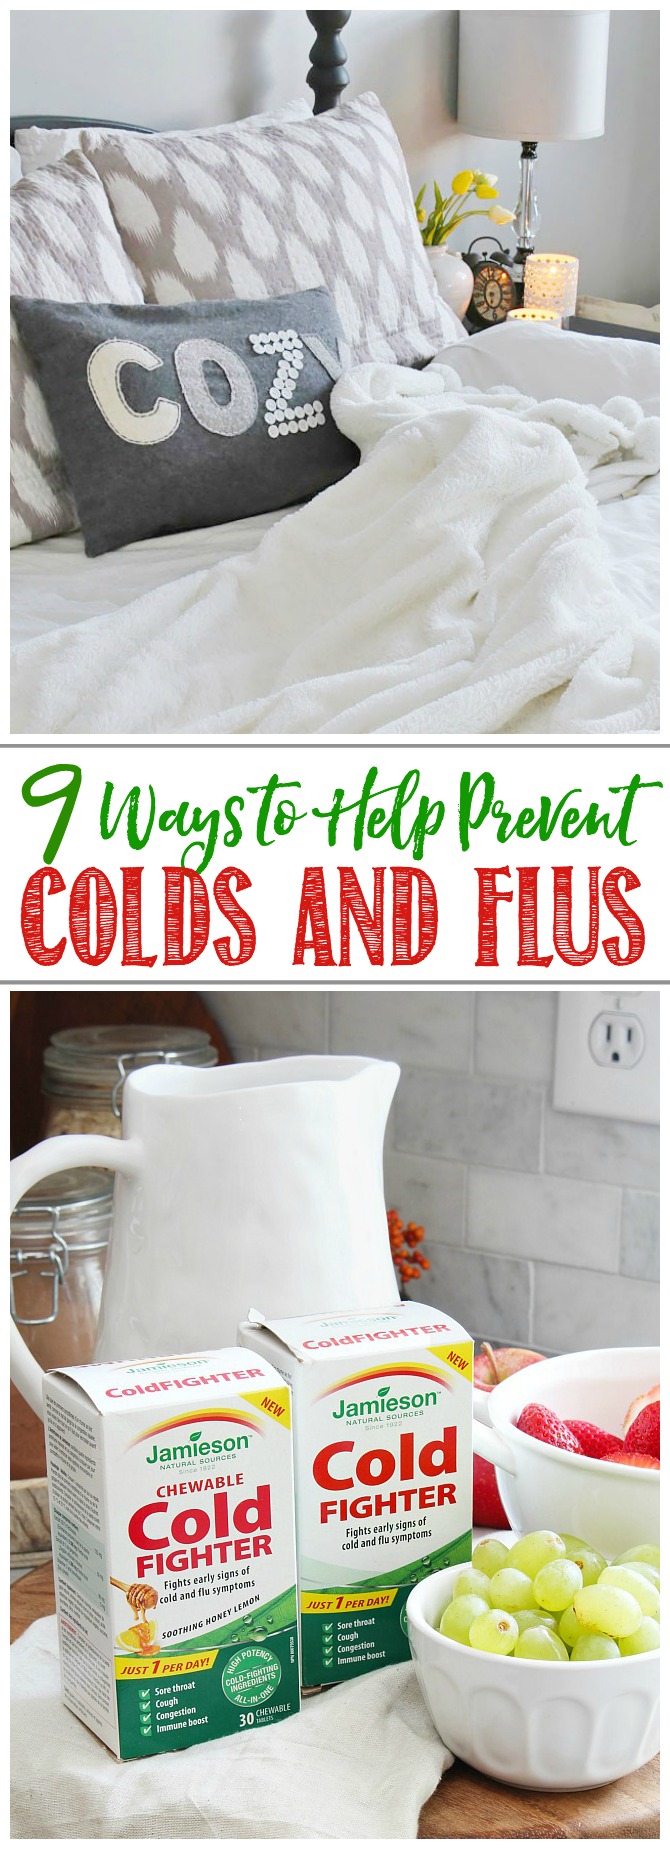 How to prevent colds and flus. Jamieson cold fighter supplements with bowls of grapes and strawberries.